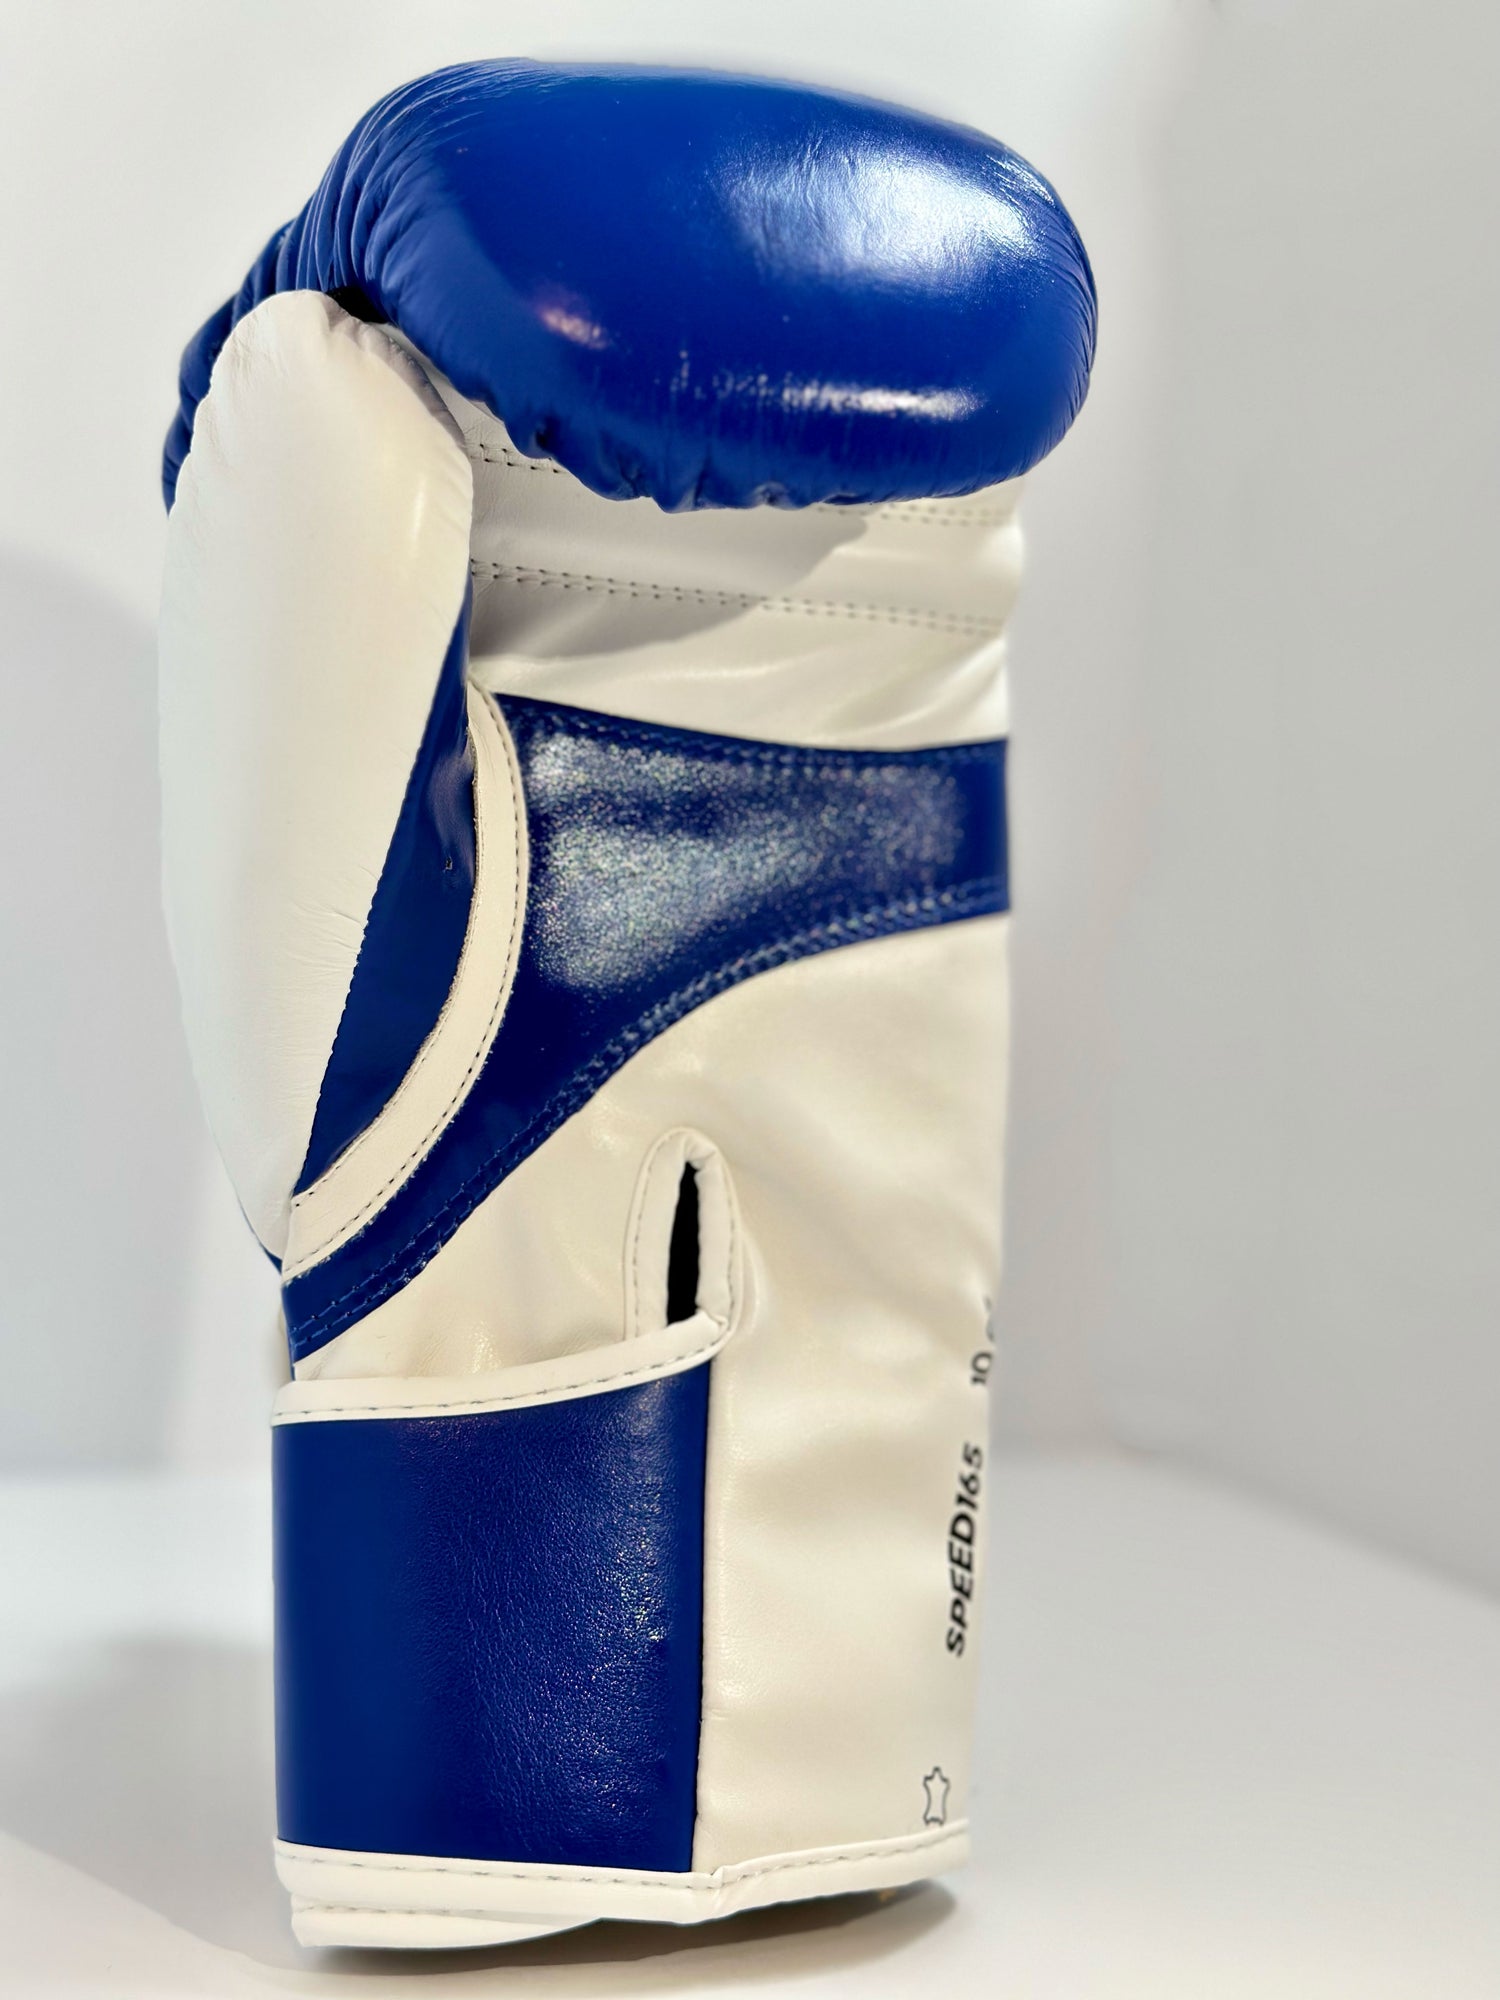 Adidas WAKO Approved Kickboxing Fight Gloves, Cowhide Cuir Leather Speed 165 adiSBG165 Competition Gloves 10 Oz Blue Palm left Hand